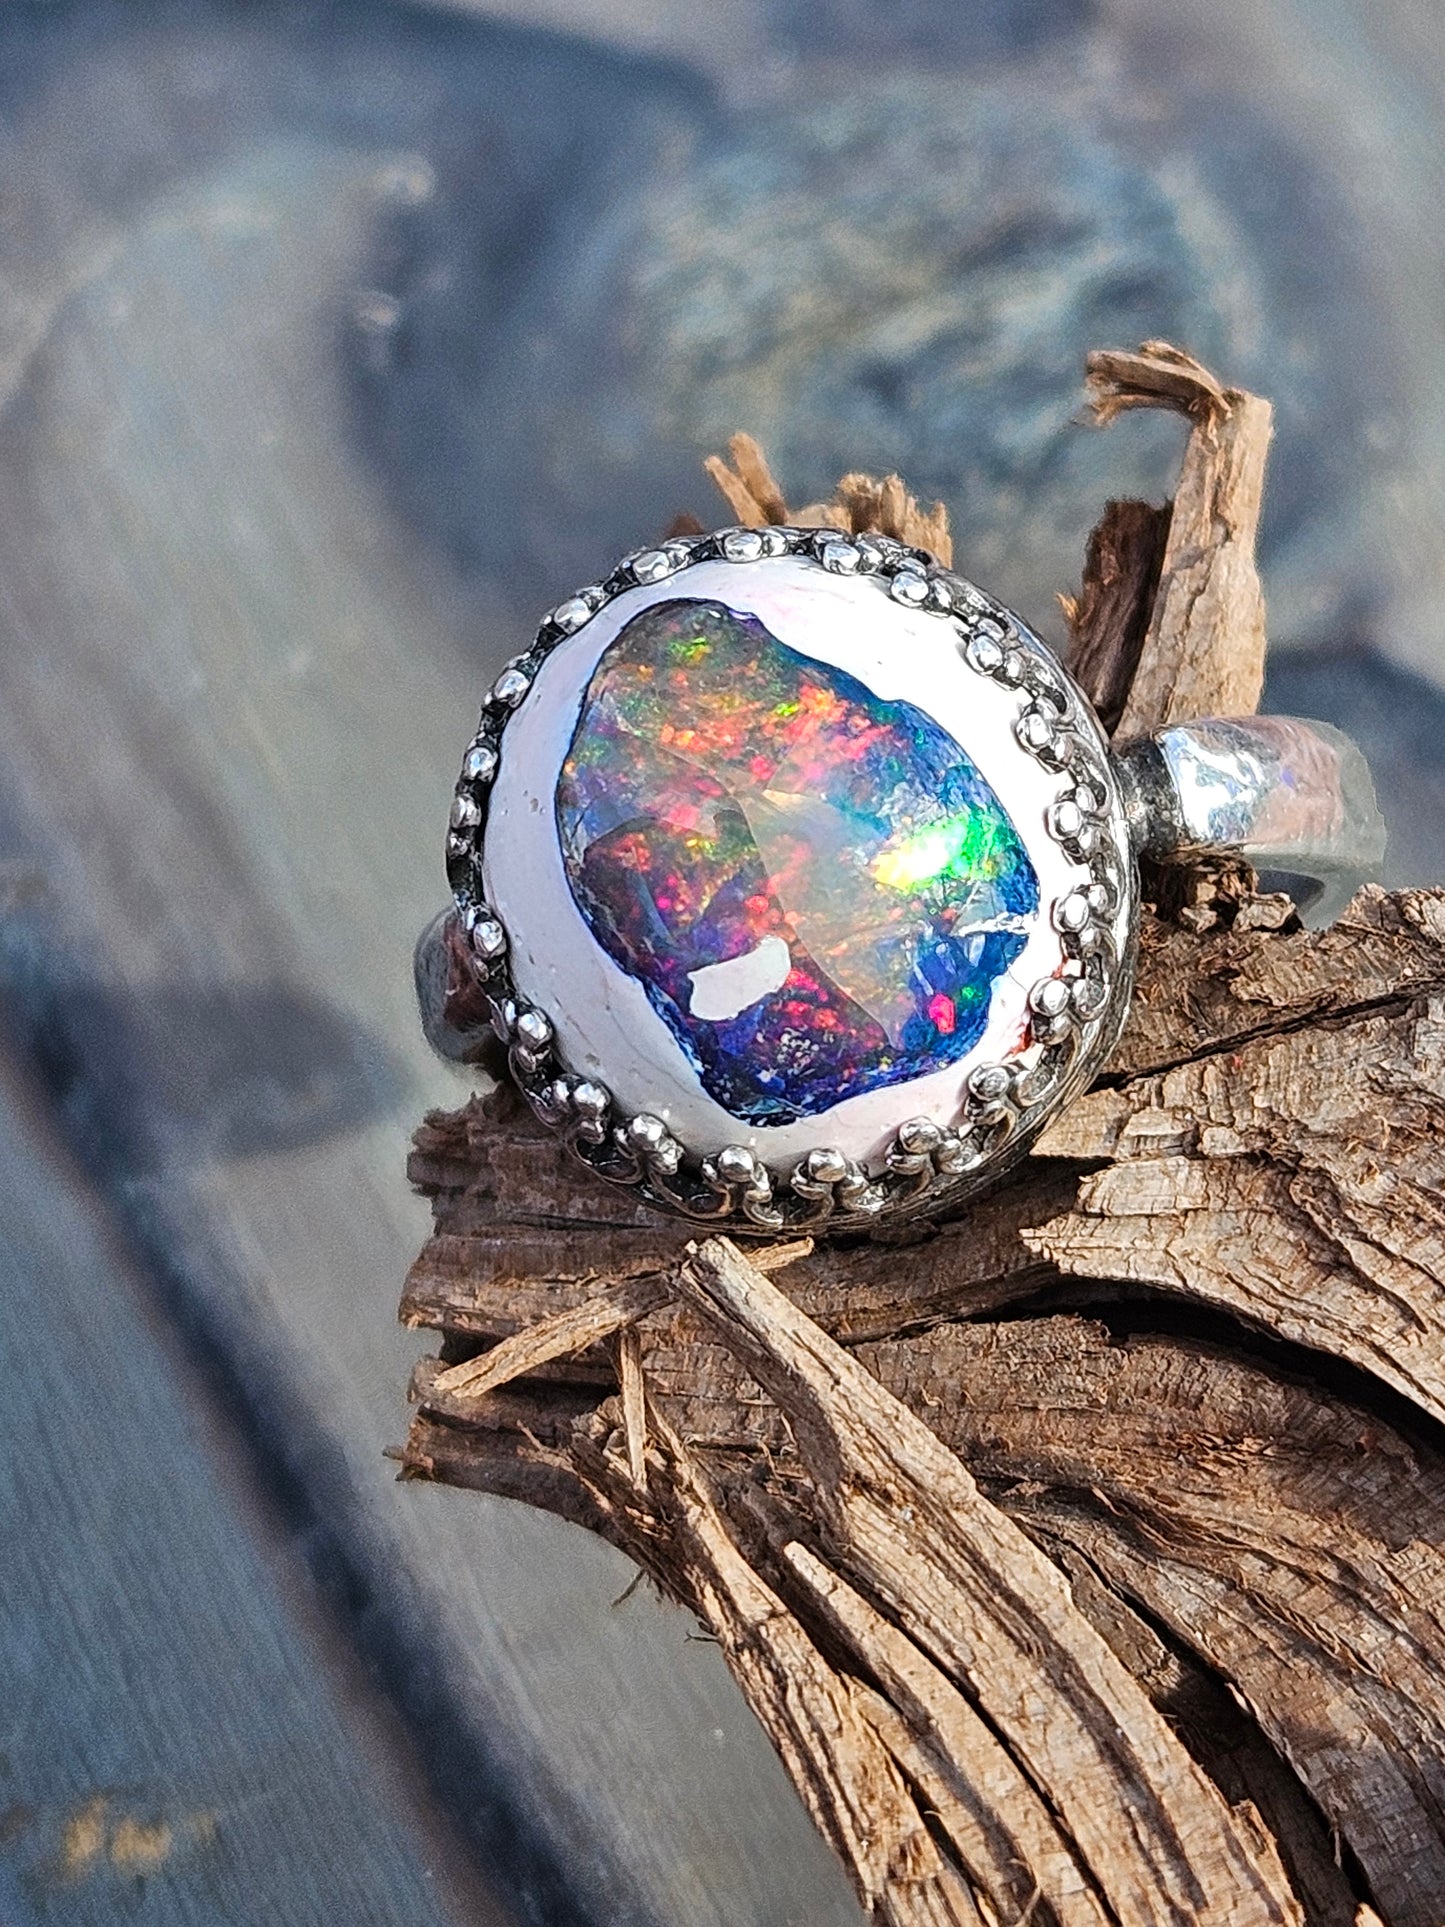 "Juice" Immaculate Mexican Galaxy Opal Ring, size 8.5